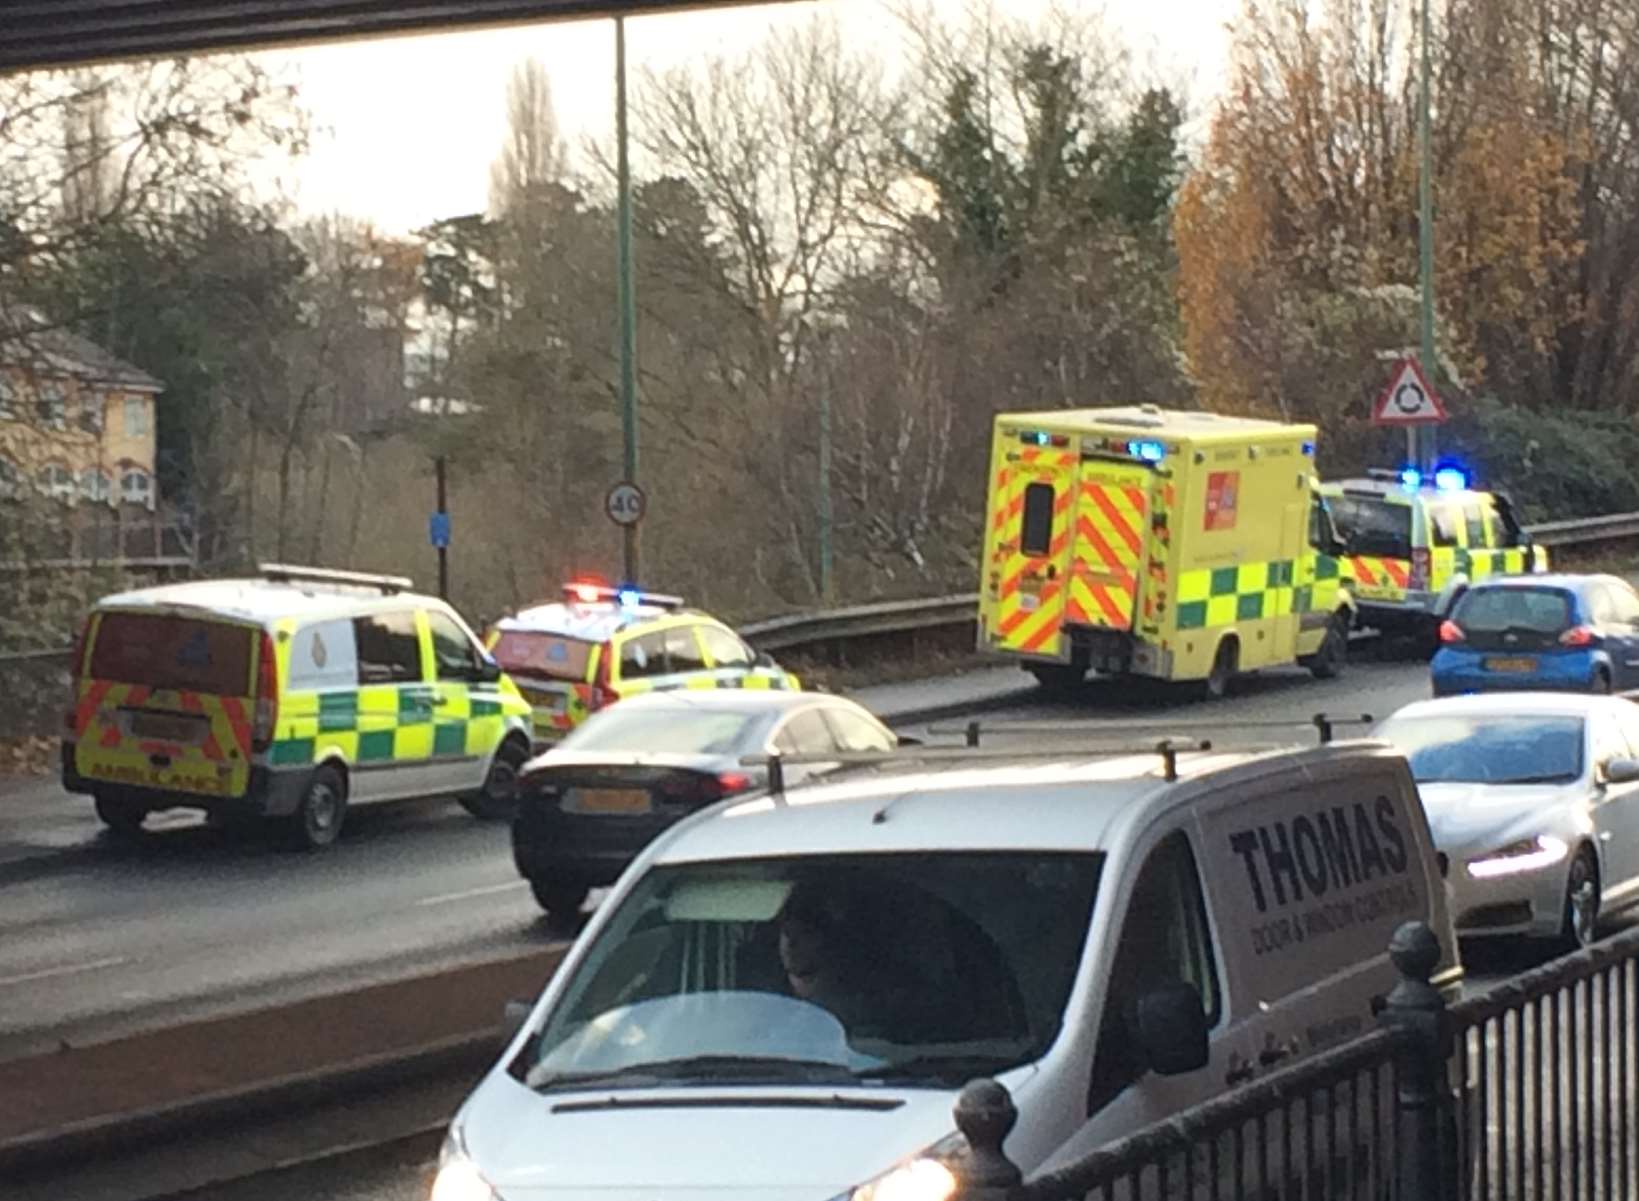 Emergency services were at the side of the River Medway after a man was pulled from the river on Friday